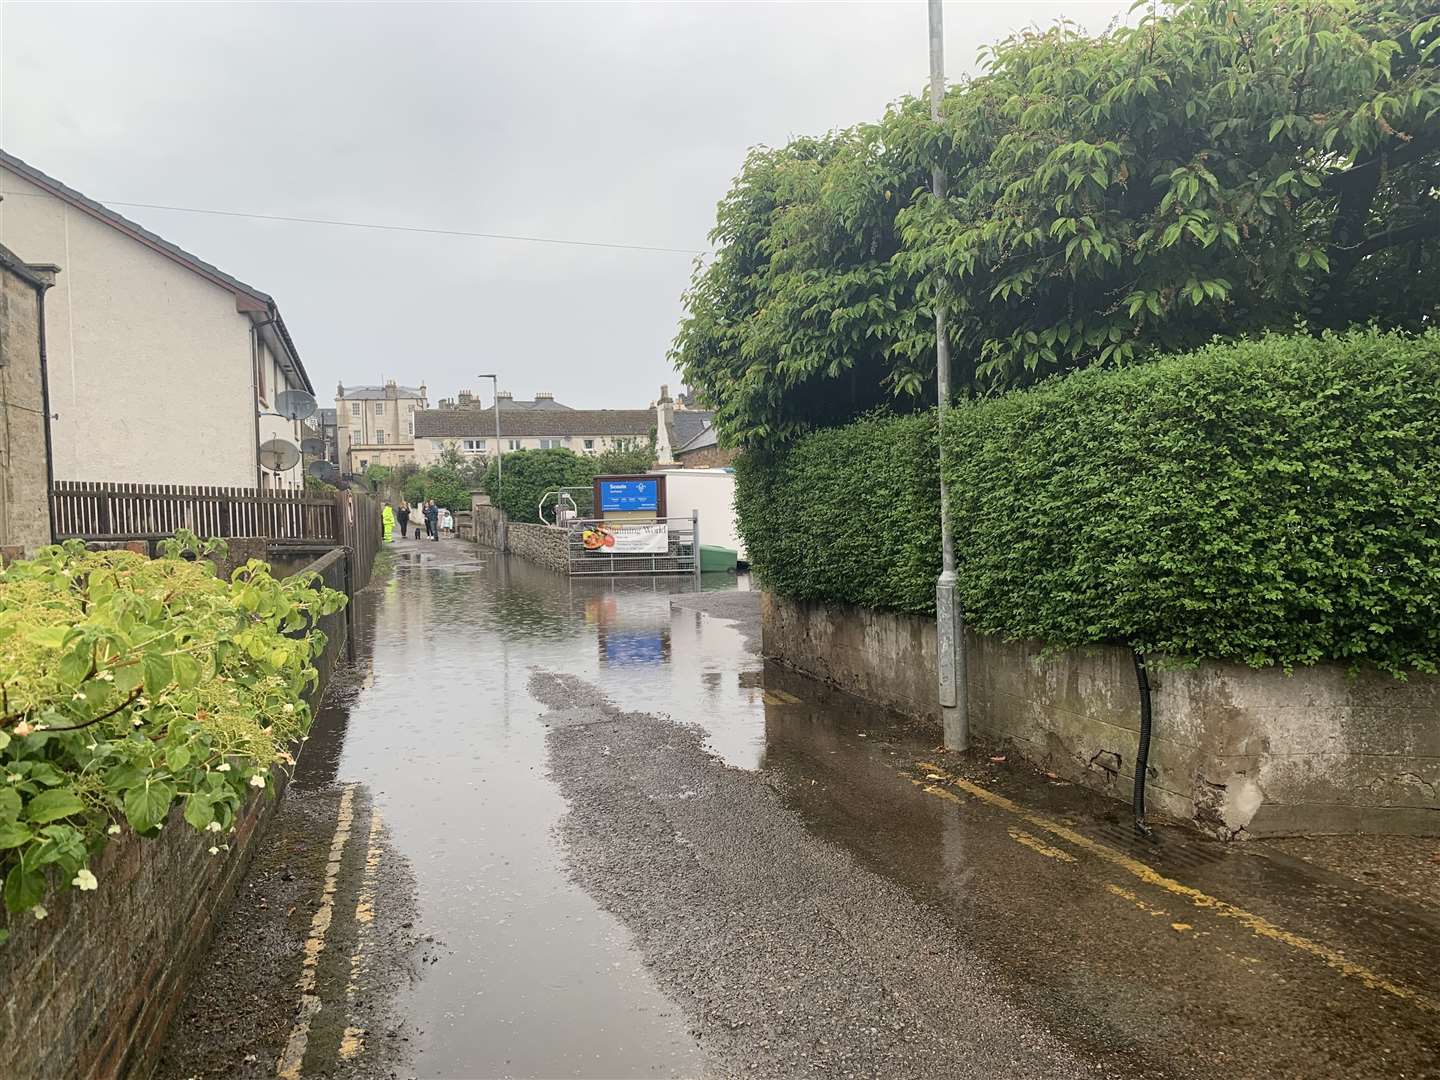 Flooding in Forres.